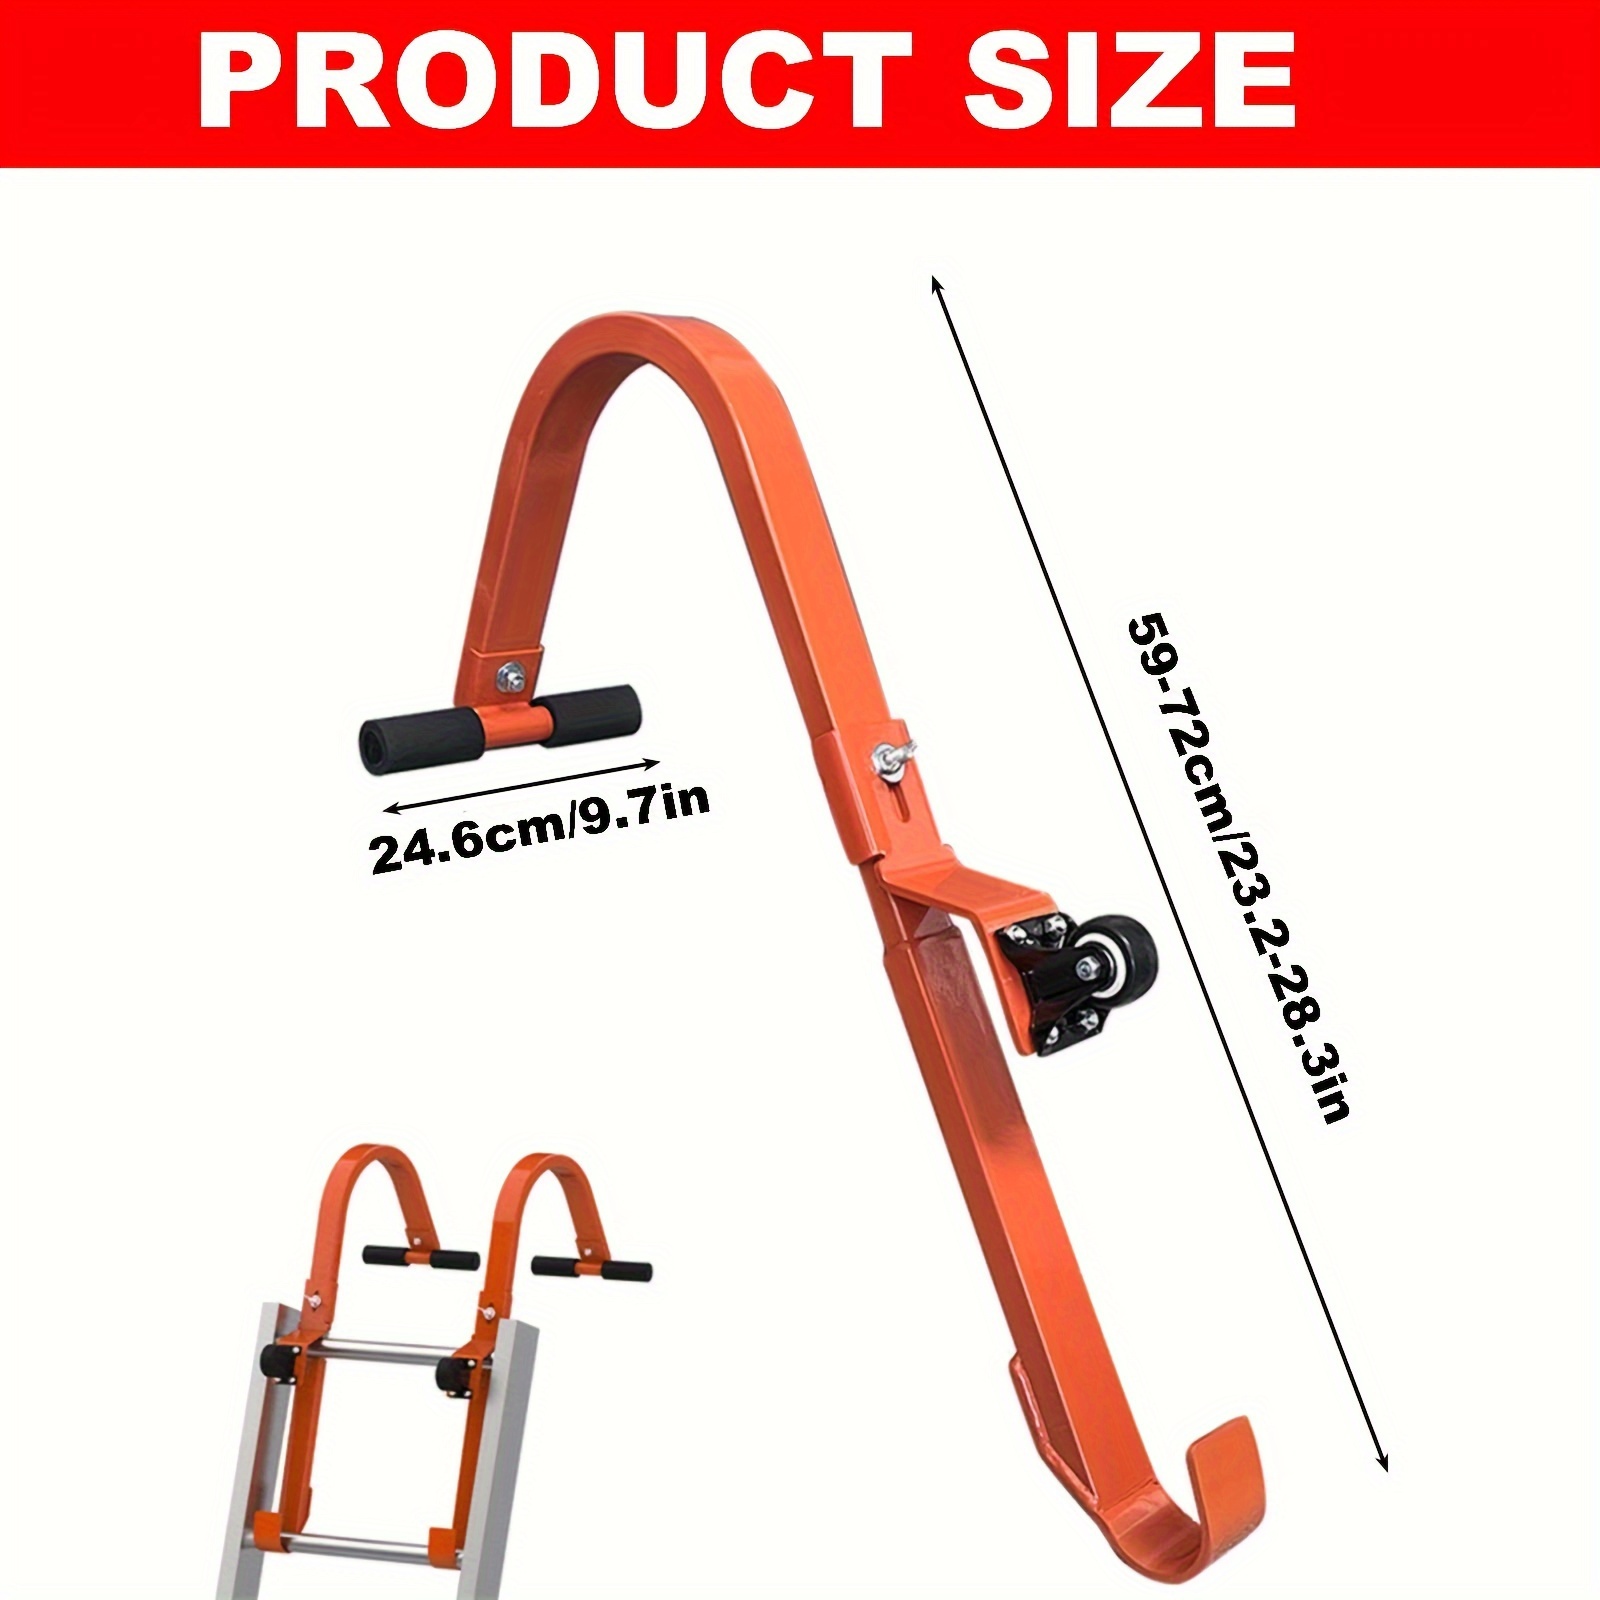 Ladder Roof Hook with Wheel, Heavy Duty Extension Ladder Stabilizer, Roof  Ridge Extension, T-Bar Rubber Grip for Damage Prevention,Ladder Hooks Two